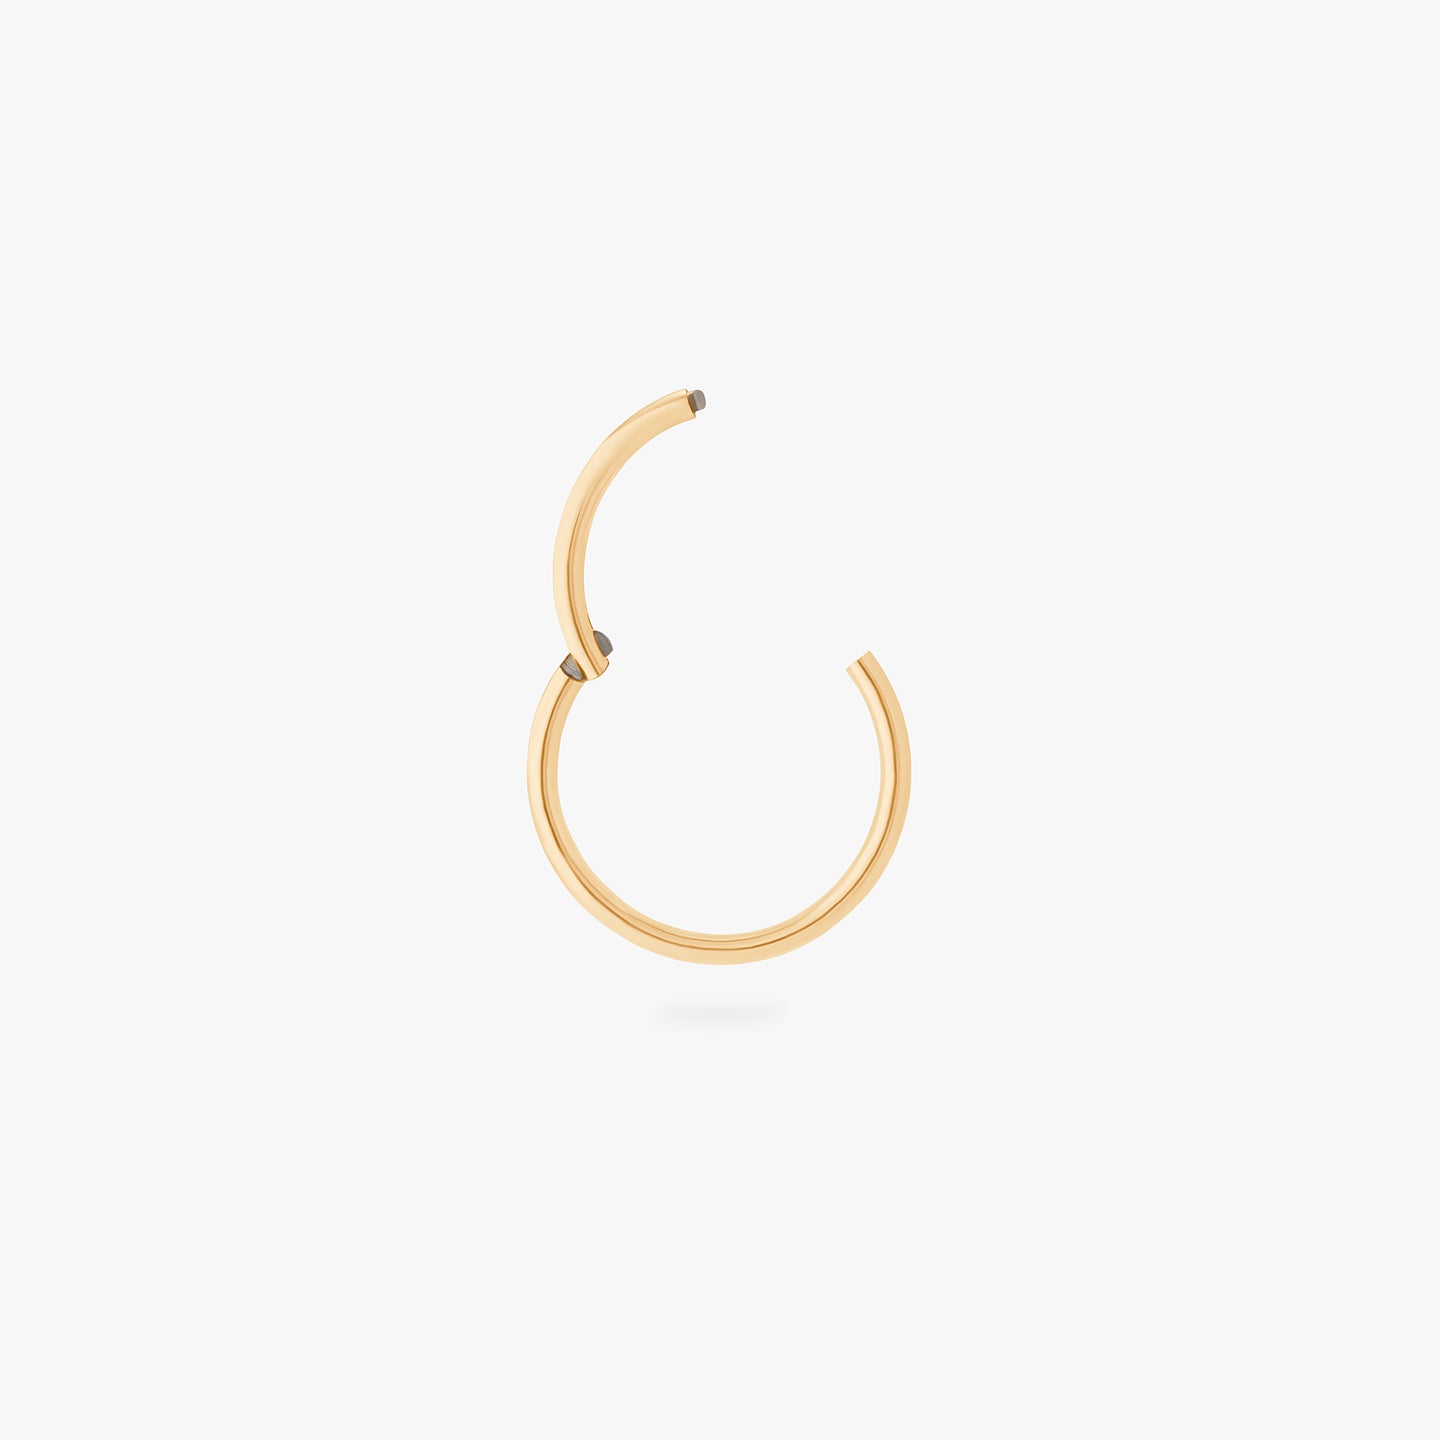 This is an image of a gold clicker with a 10mm inner diameter. color:null|gold